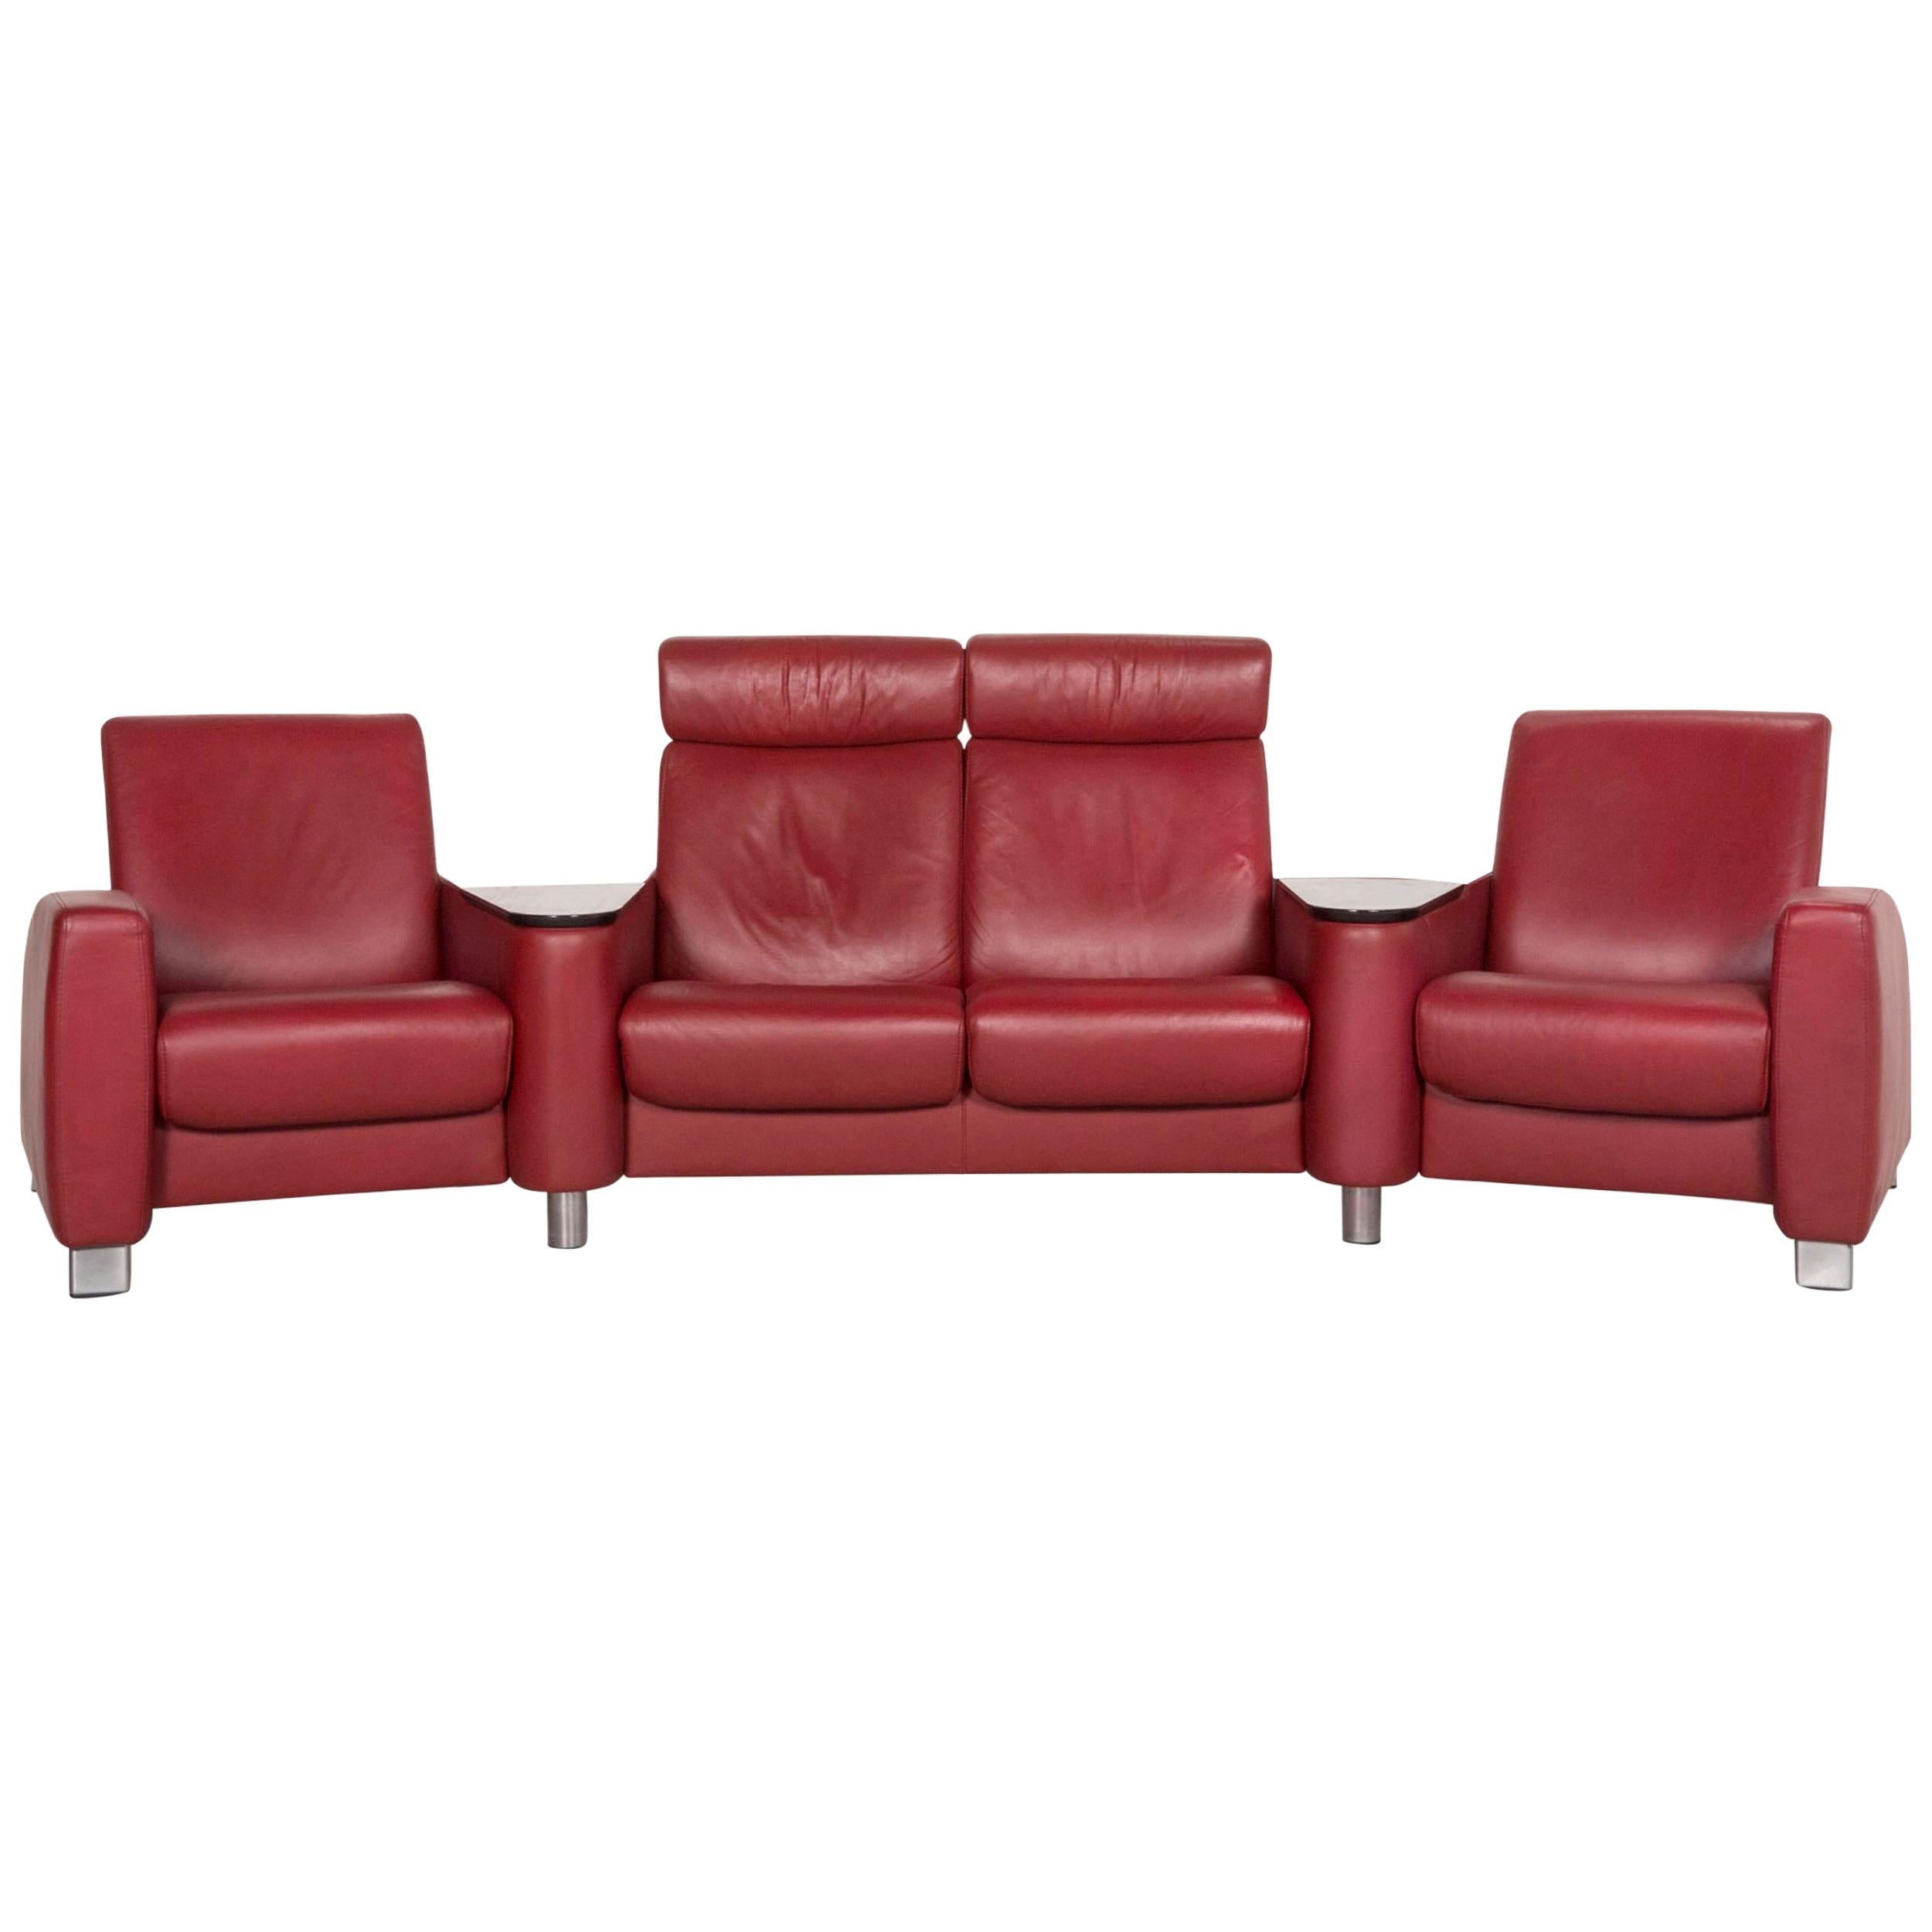 Stressless Arion Leather Sofa Red Four-Seat Function Home Theater